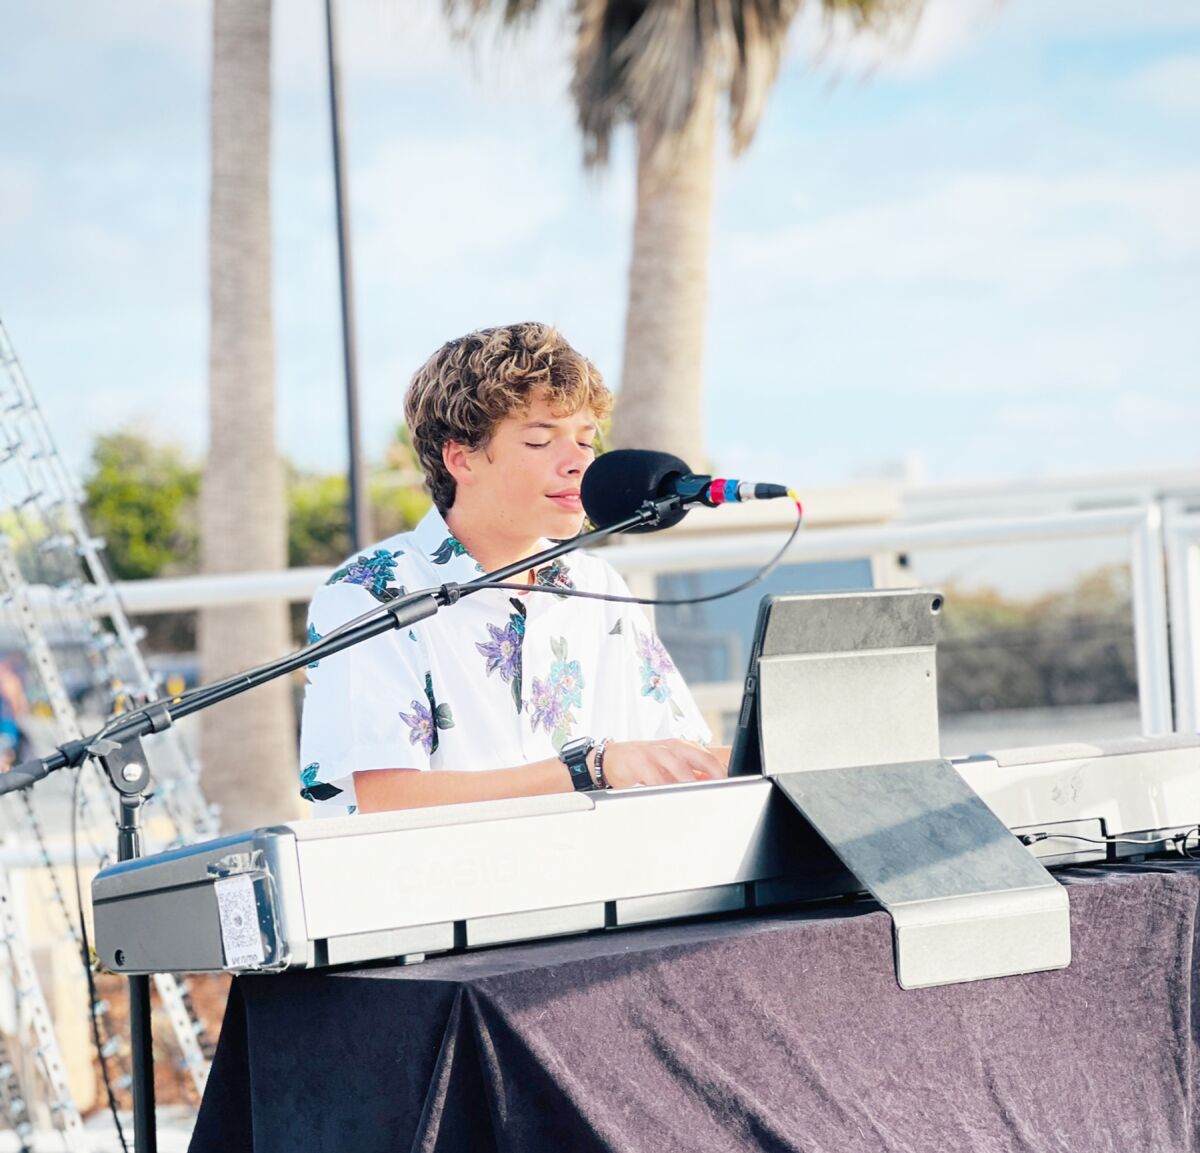 Makena Stumpo playing his electronic keyboard and singing for a public audience.